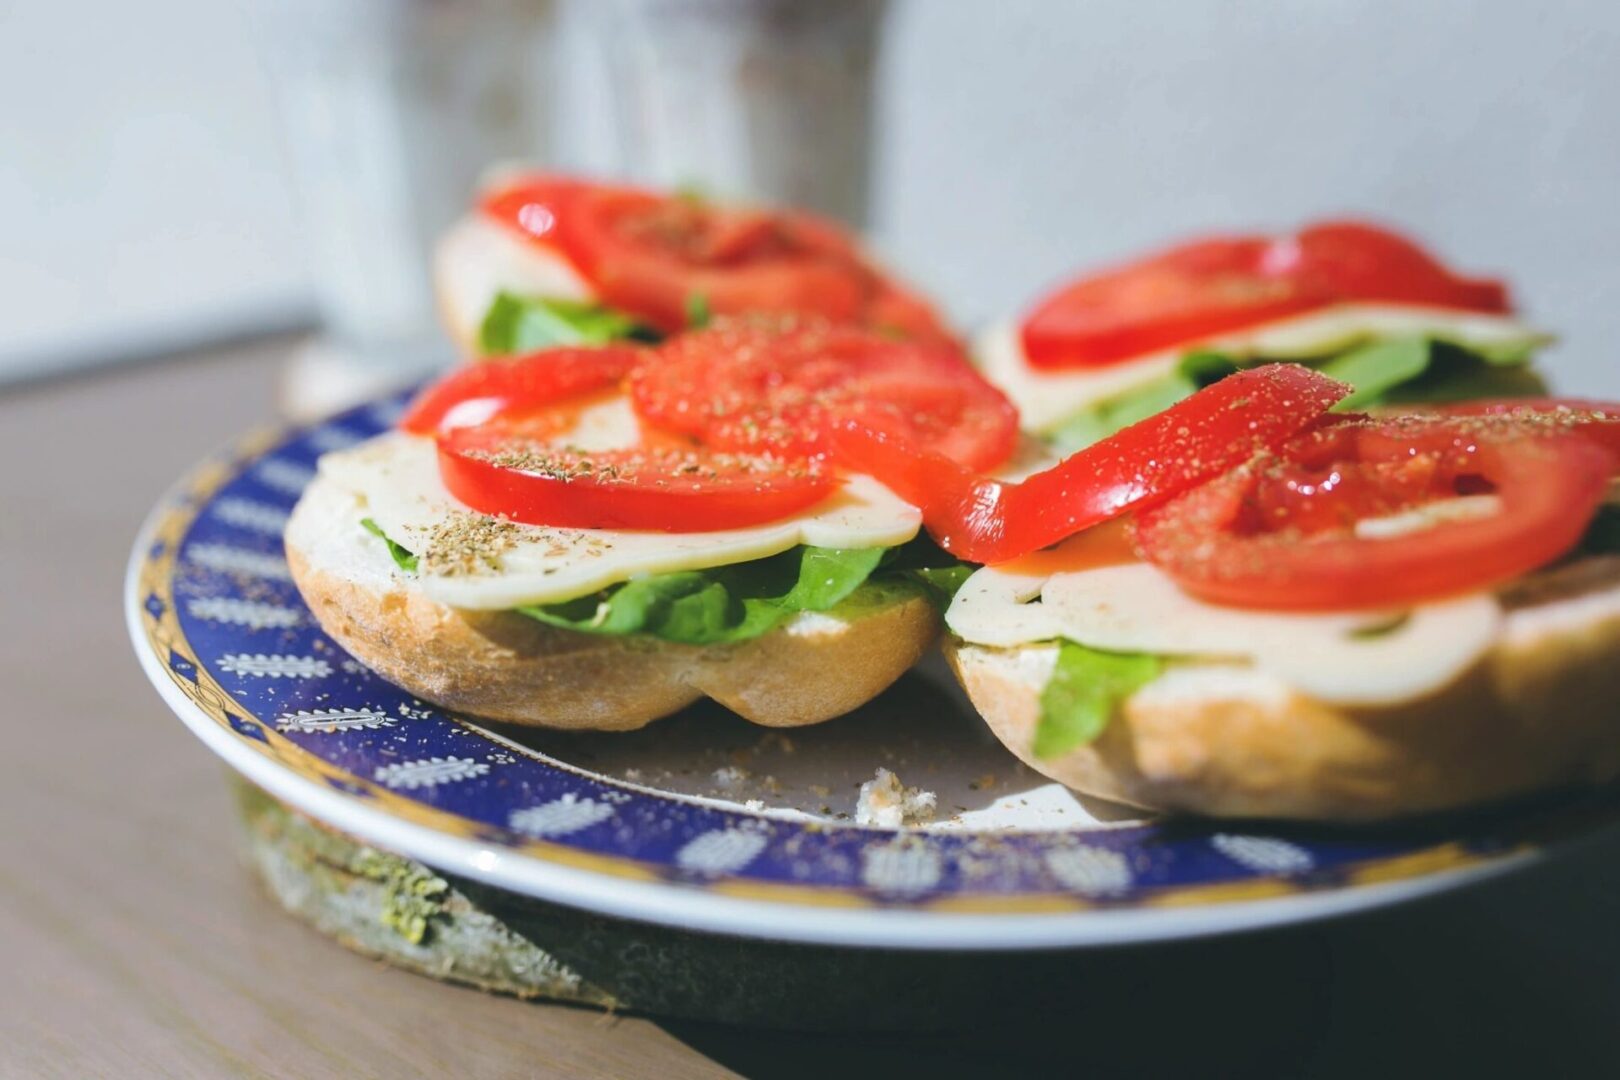 A plate with a sandwich with tomatoes and cheese on it.